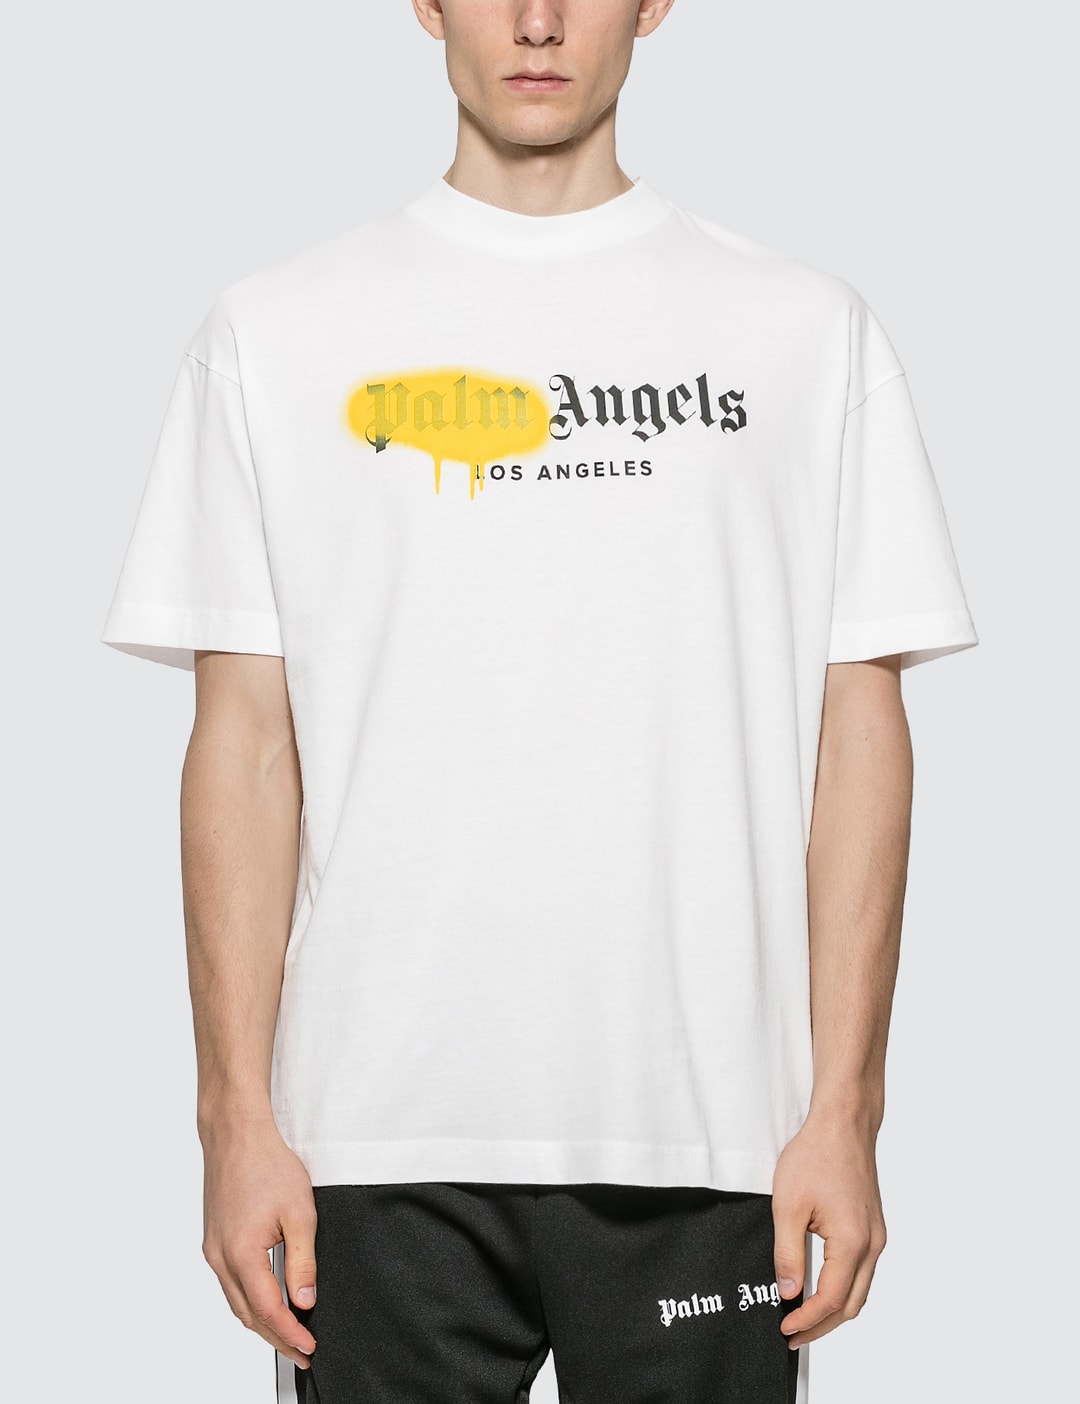 Palm Angels - Los Angeles Sprayed T-shirt  HBX - Globally Curated Fashion  and Lifestyle by Hypebeast